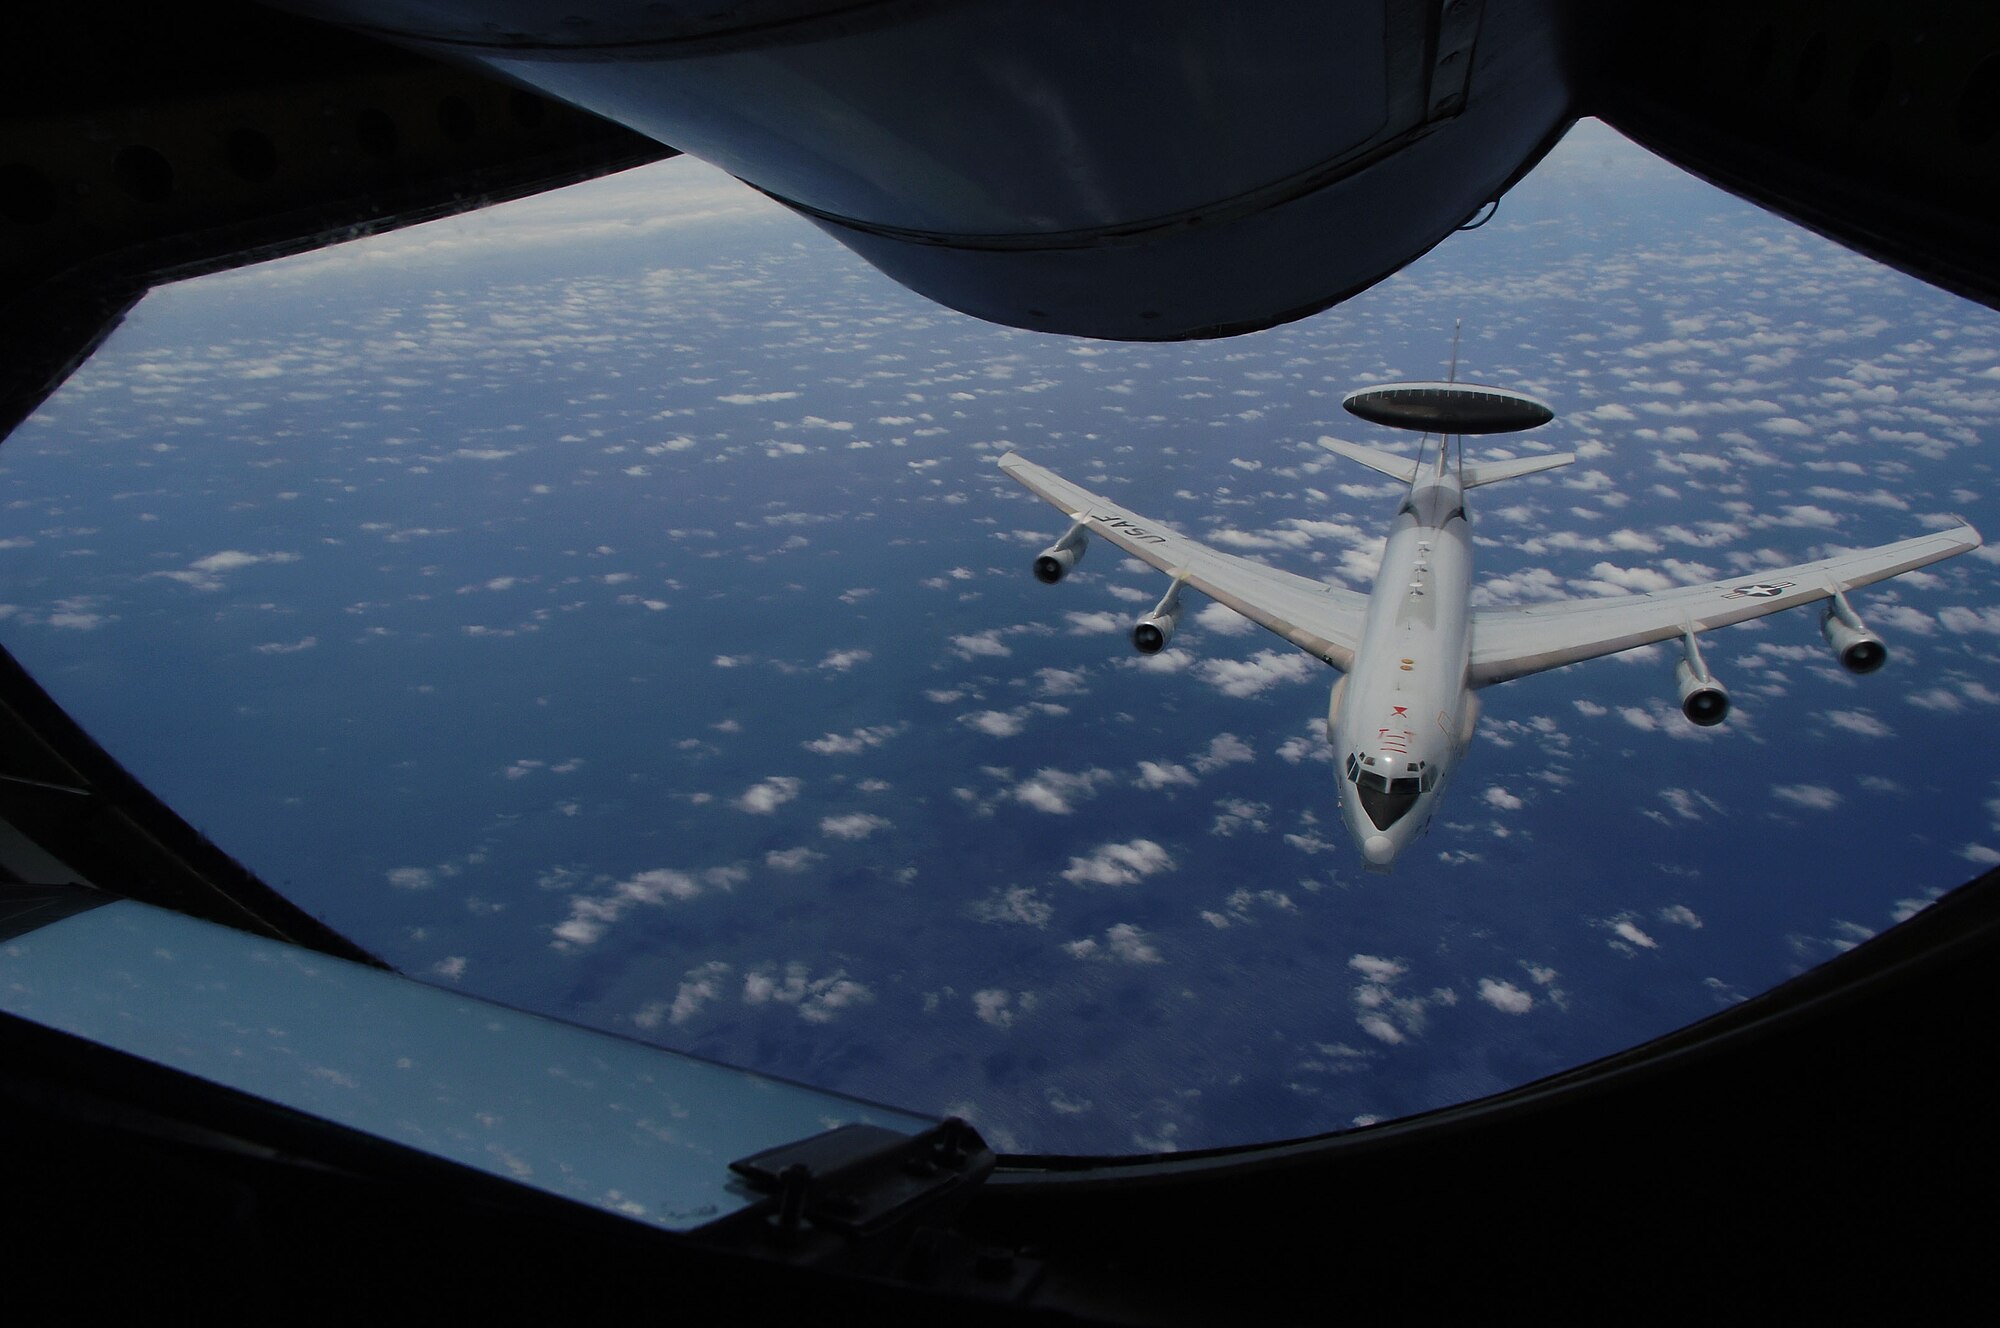 OVER THE PACIFIC OCEAN -- An E-3 Sentry airborne warning and control systems aircraft refuels off the western coast of Ecuador before patrolling the sky over South America. (U.S. Air Force photo by Master Sgt. Efrain Gonzalez)